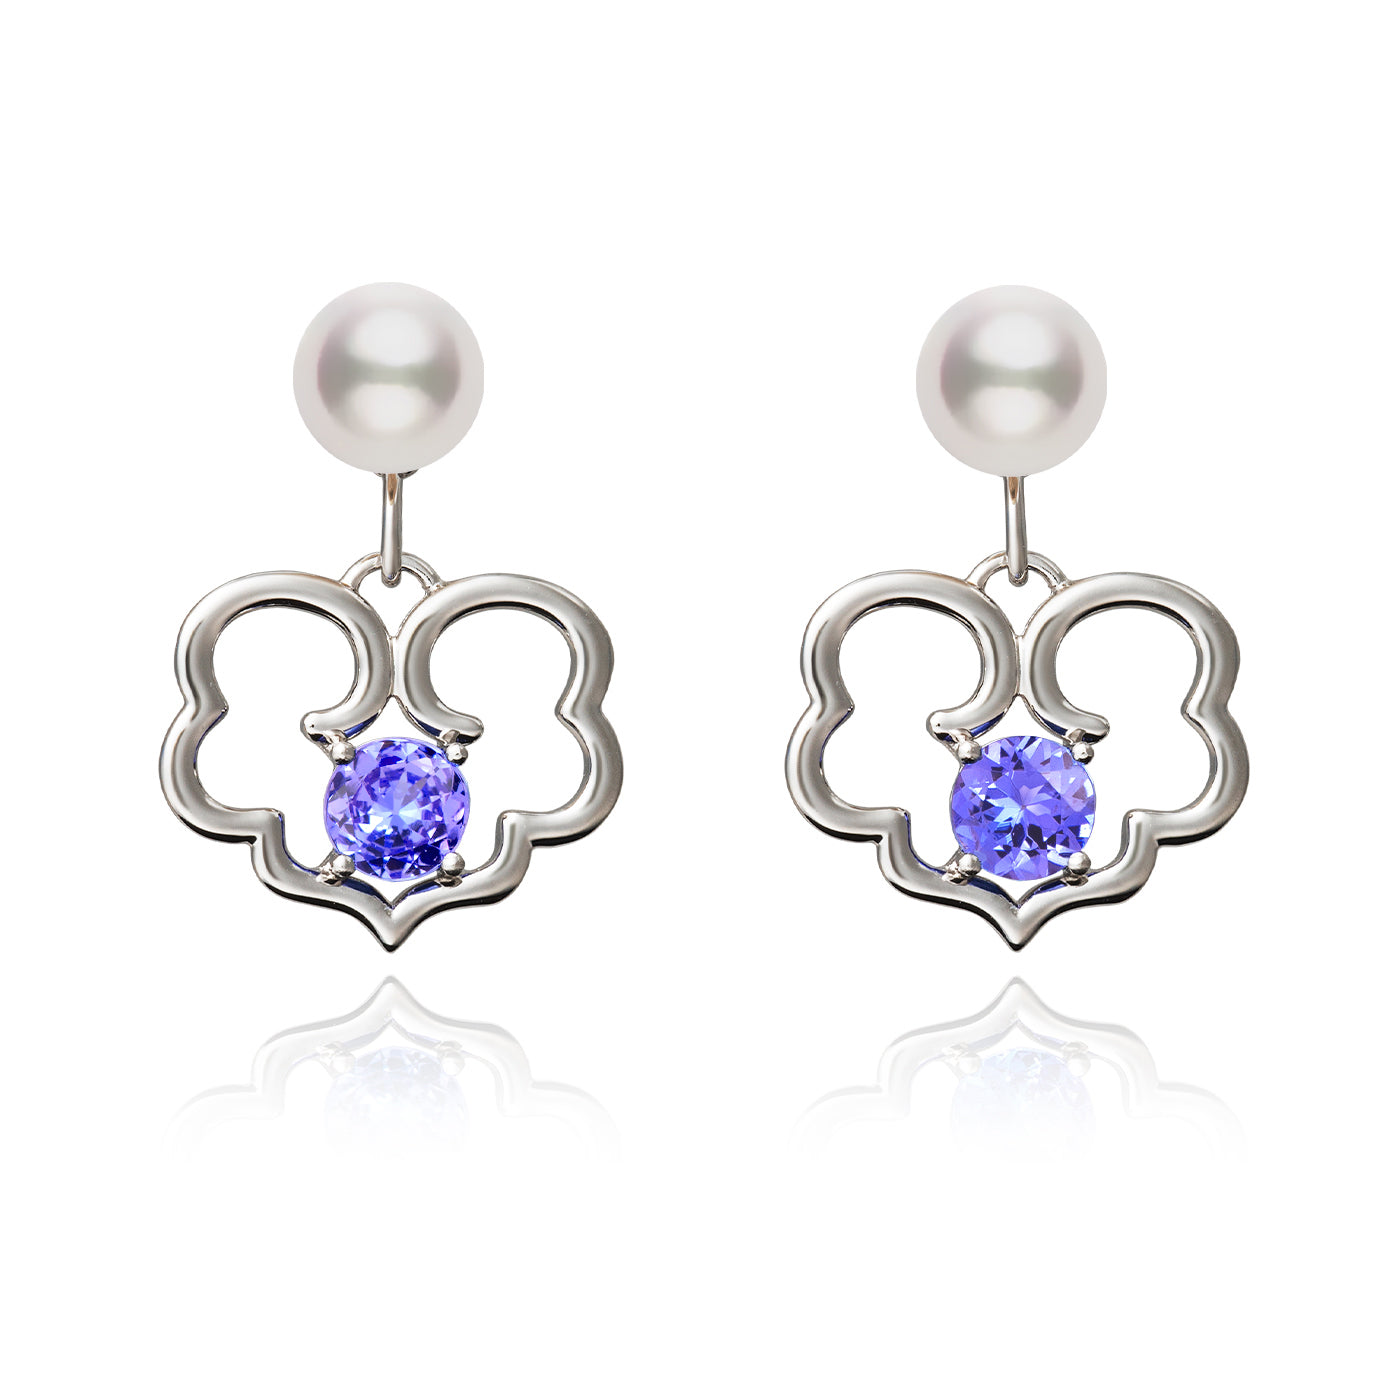 The Timeless Blessings Fine Jewelry Earrings with Tanzanite Image 1 | Shen Yun Shop